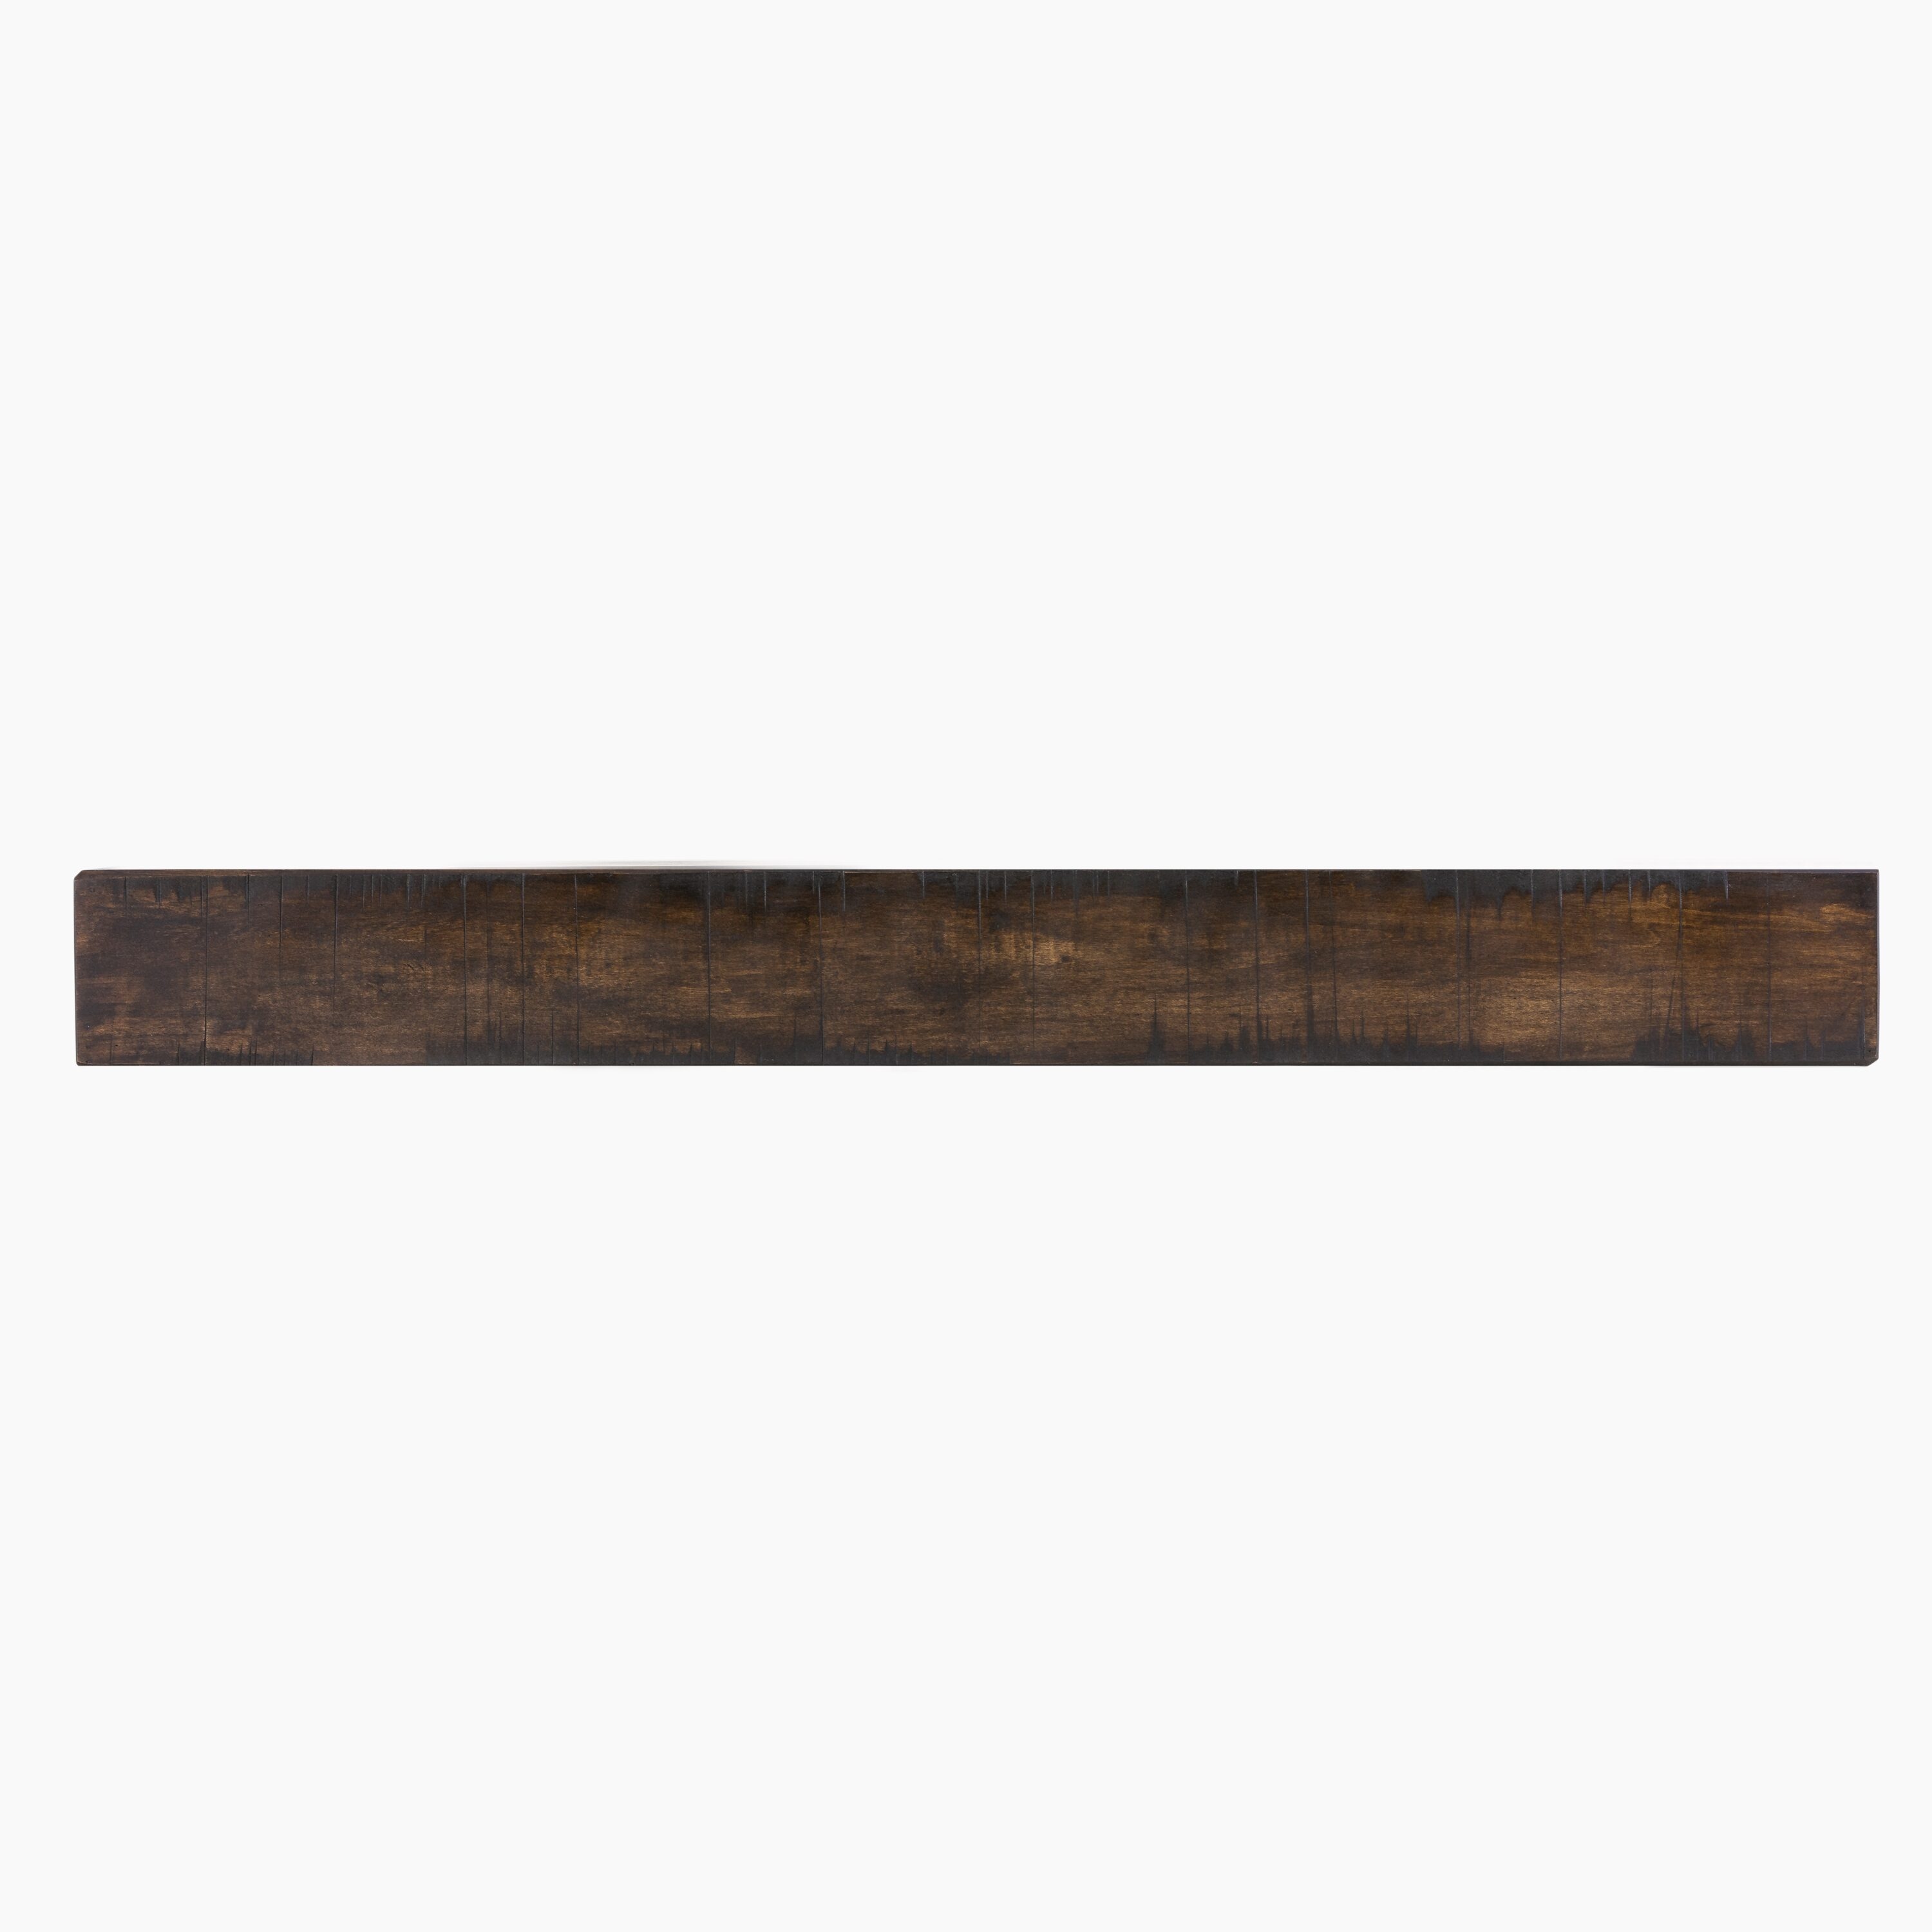 Mantels Direct Wallace 72-inch Floating Wood Fireplace Mantel